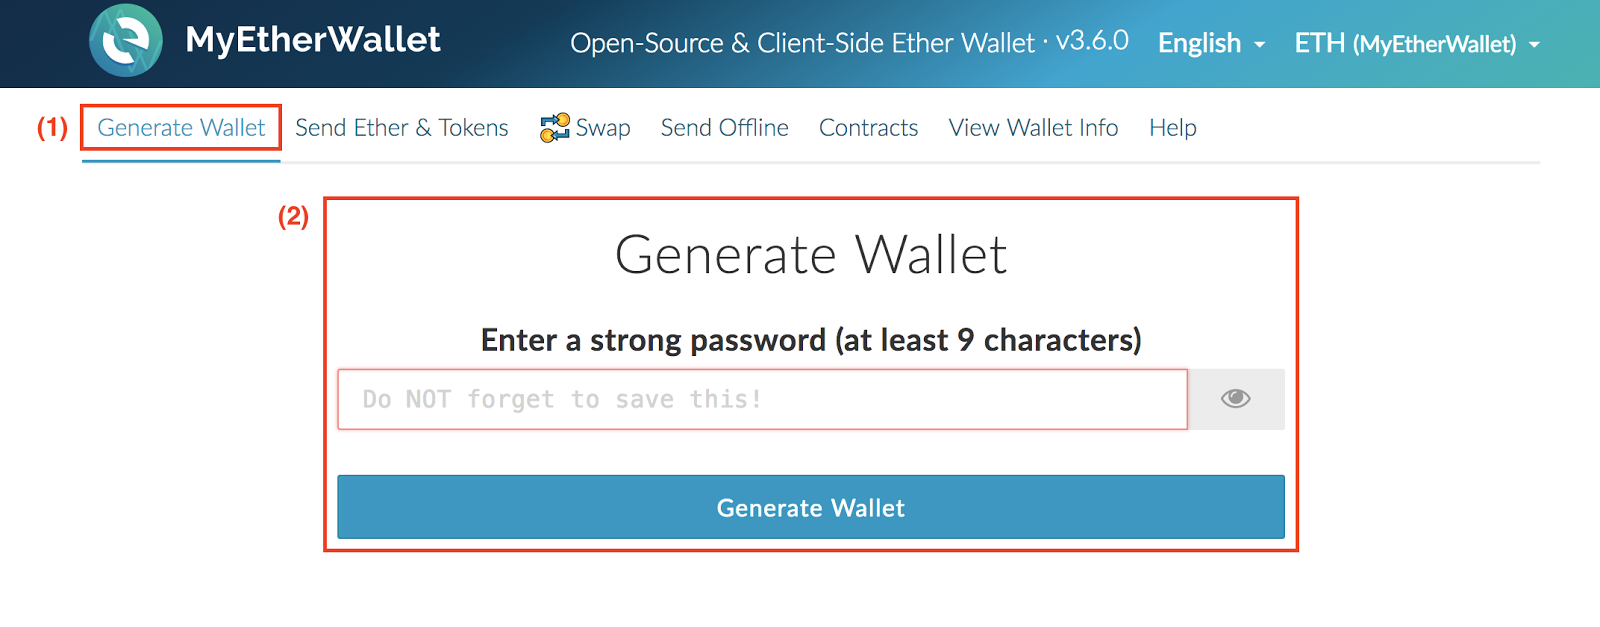 How To Check Bitcoin Balance Private Key Ethereum Token Request Price - 